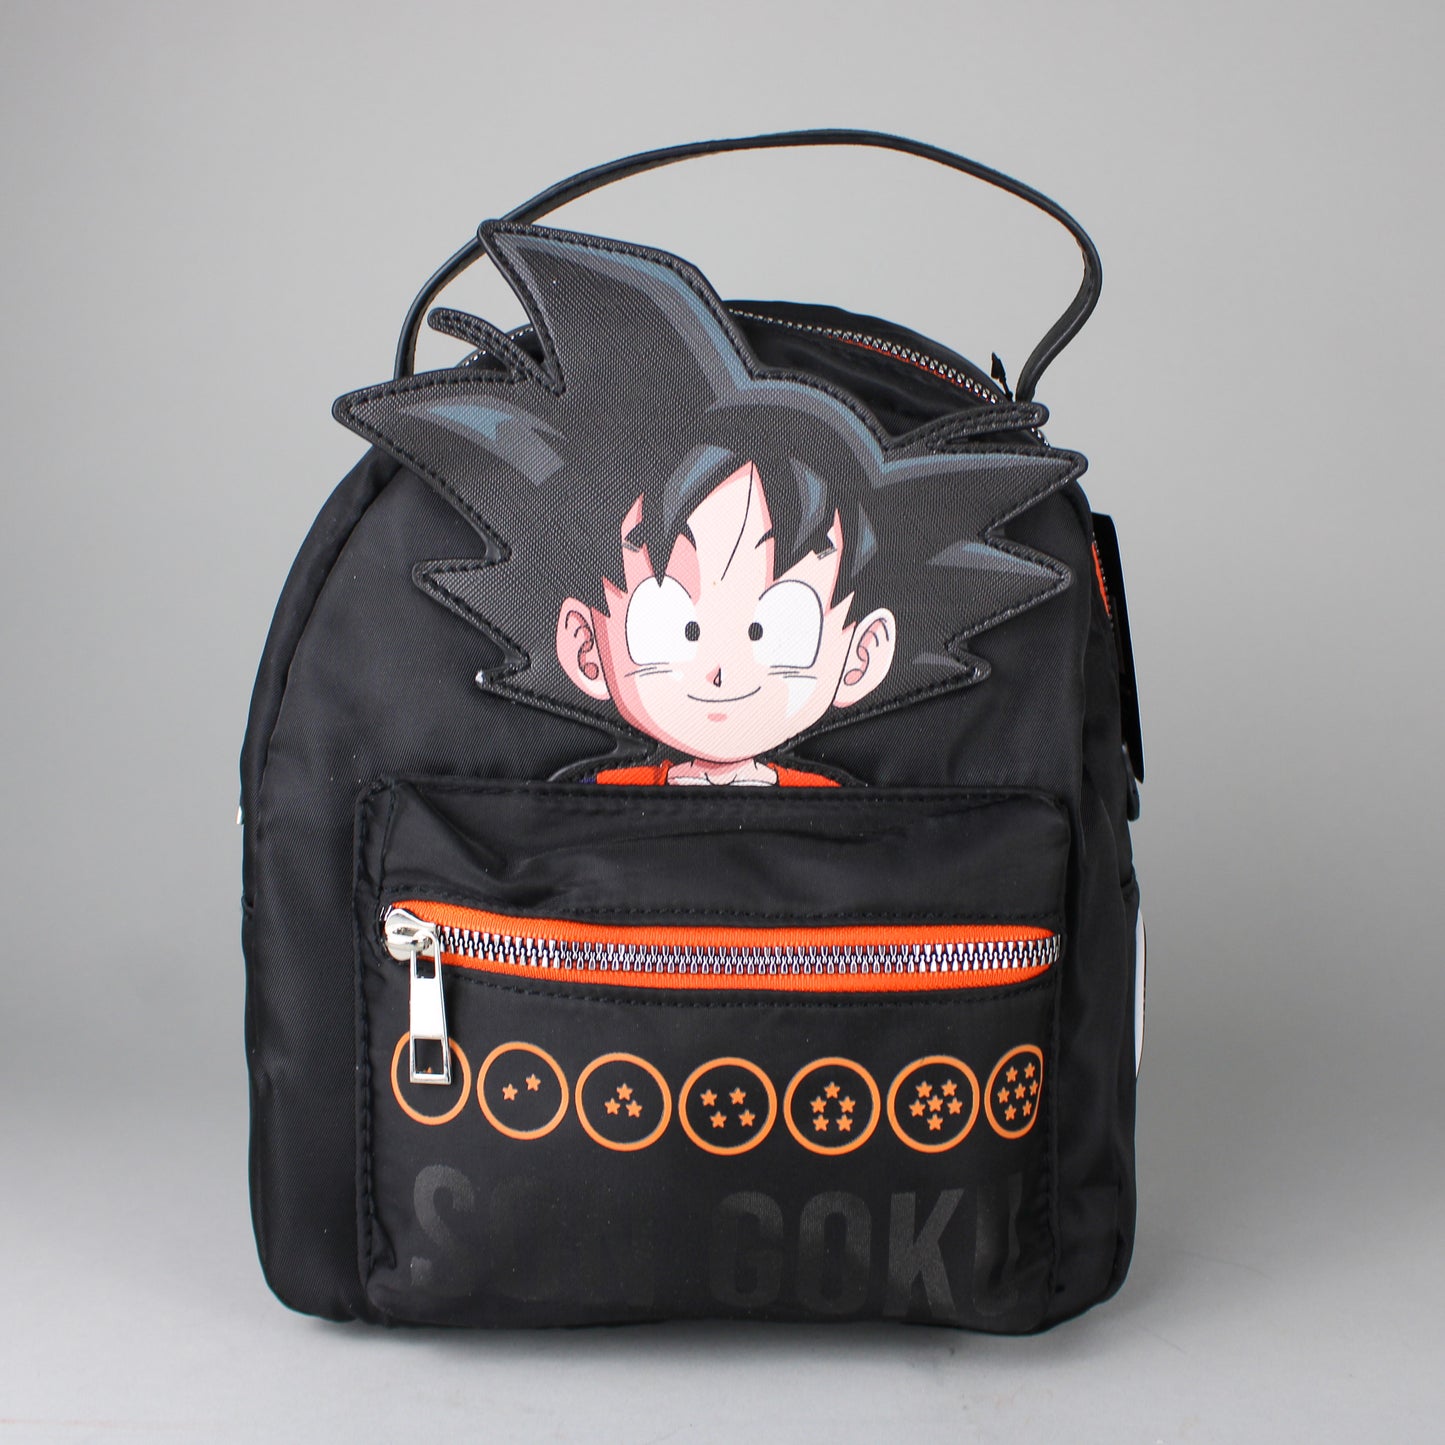 Load image into Gallery viewer, Son Goku (Dragon Ball Z) Black Mini Backpack
